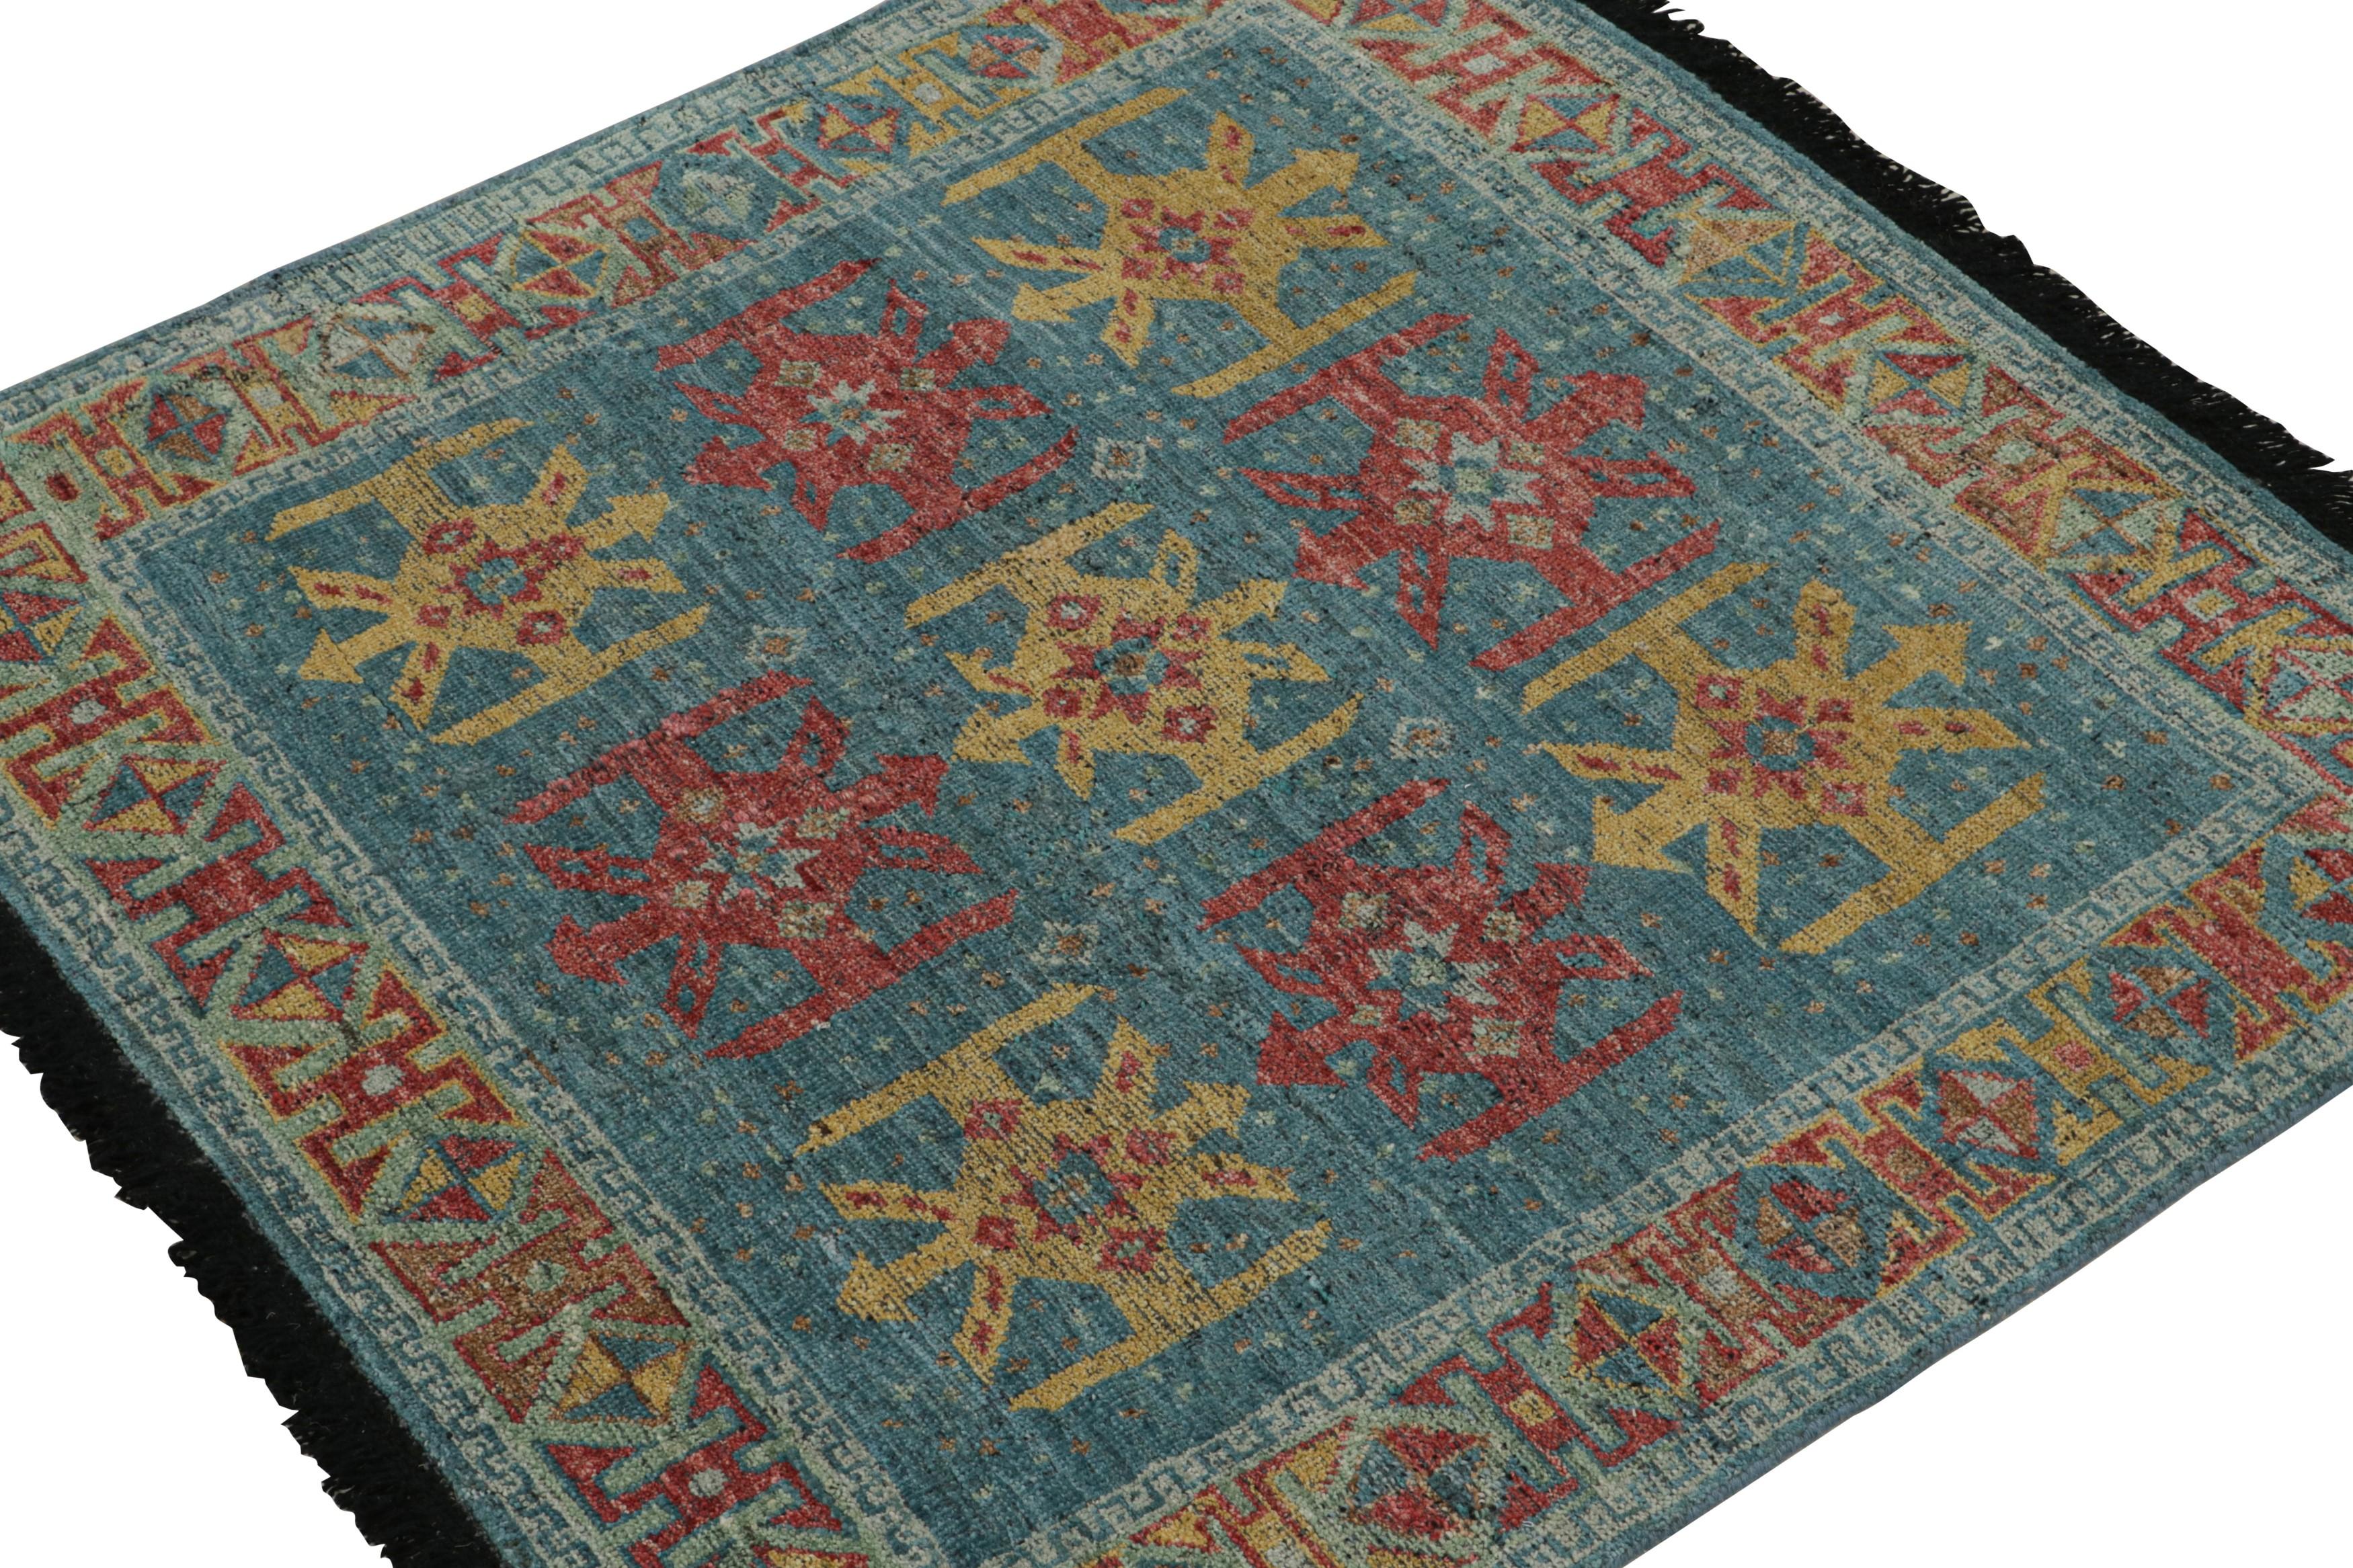 This 4x4 rug is a grand new entry to Rug & Kilim’s custom classics Burano collection. Hand-knotted in Persian wool.

Further on the Design: 

Inspired by antique tribal rugs, this square rug revels in blue, red & gold with natural movement and